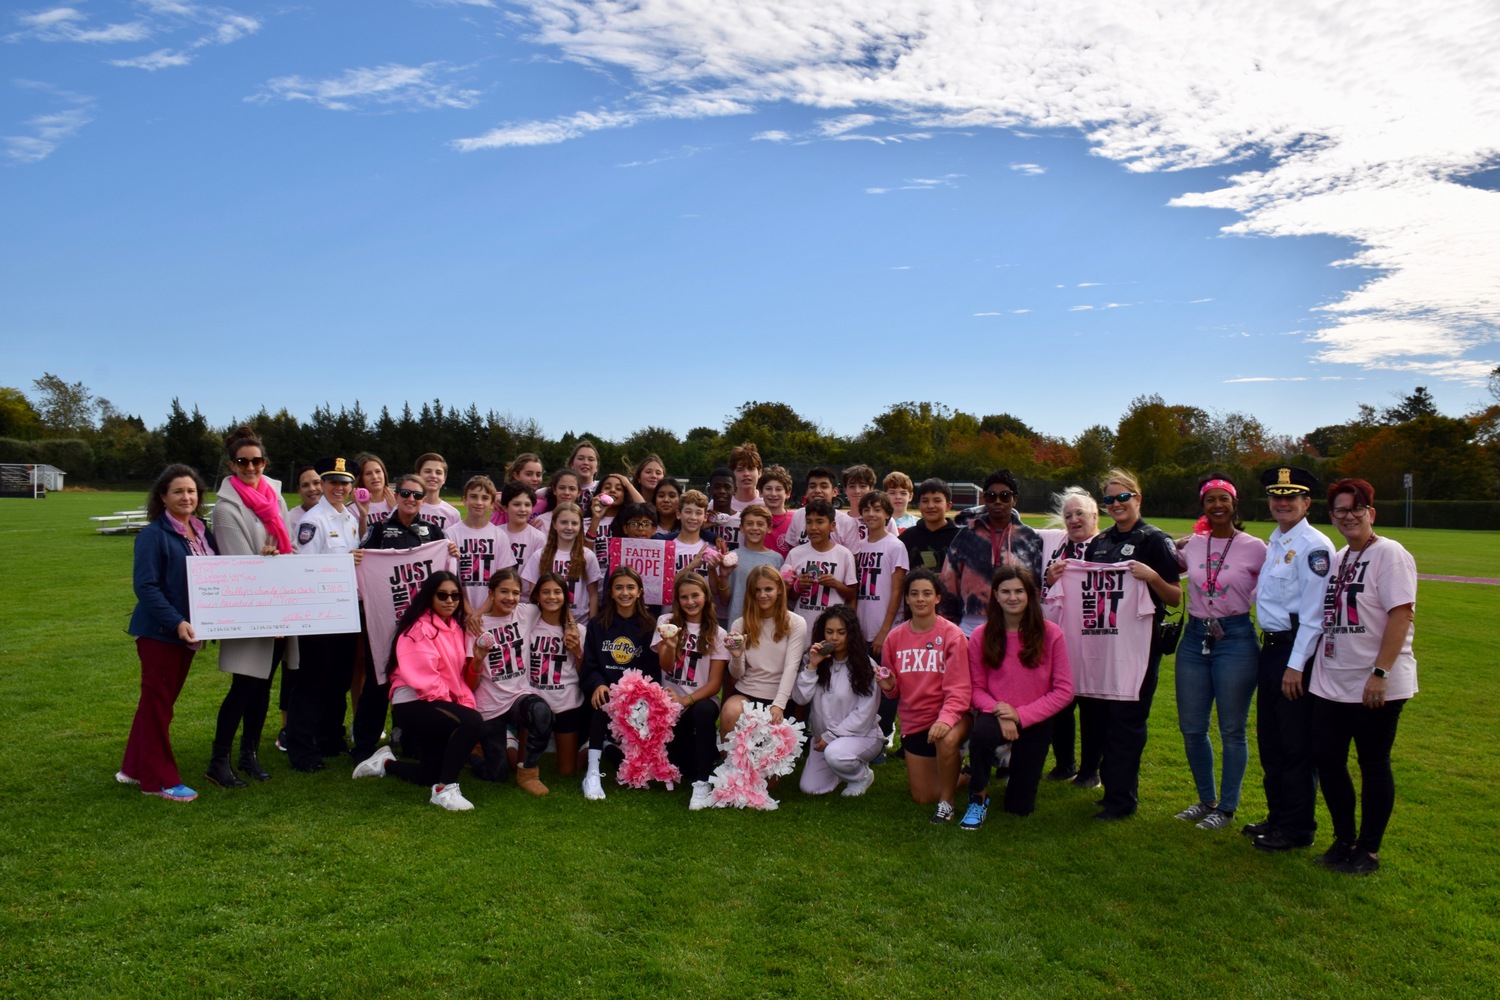 Southampton Intermediate School marked Breast Cancer Awareness Month with several activities. COURTESY SOUTHAMPTON SCHOOL DISTRICT